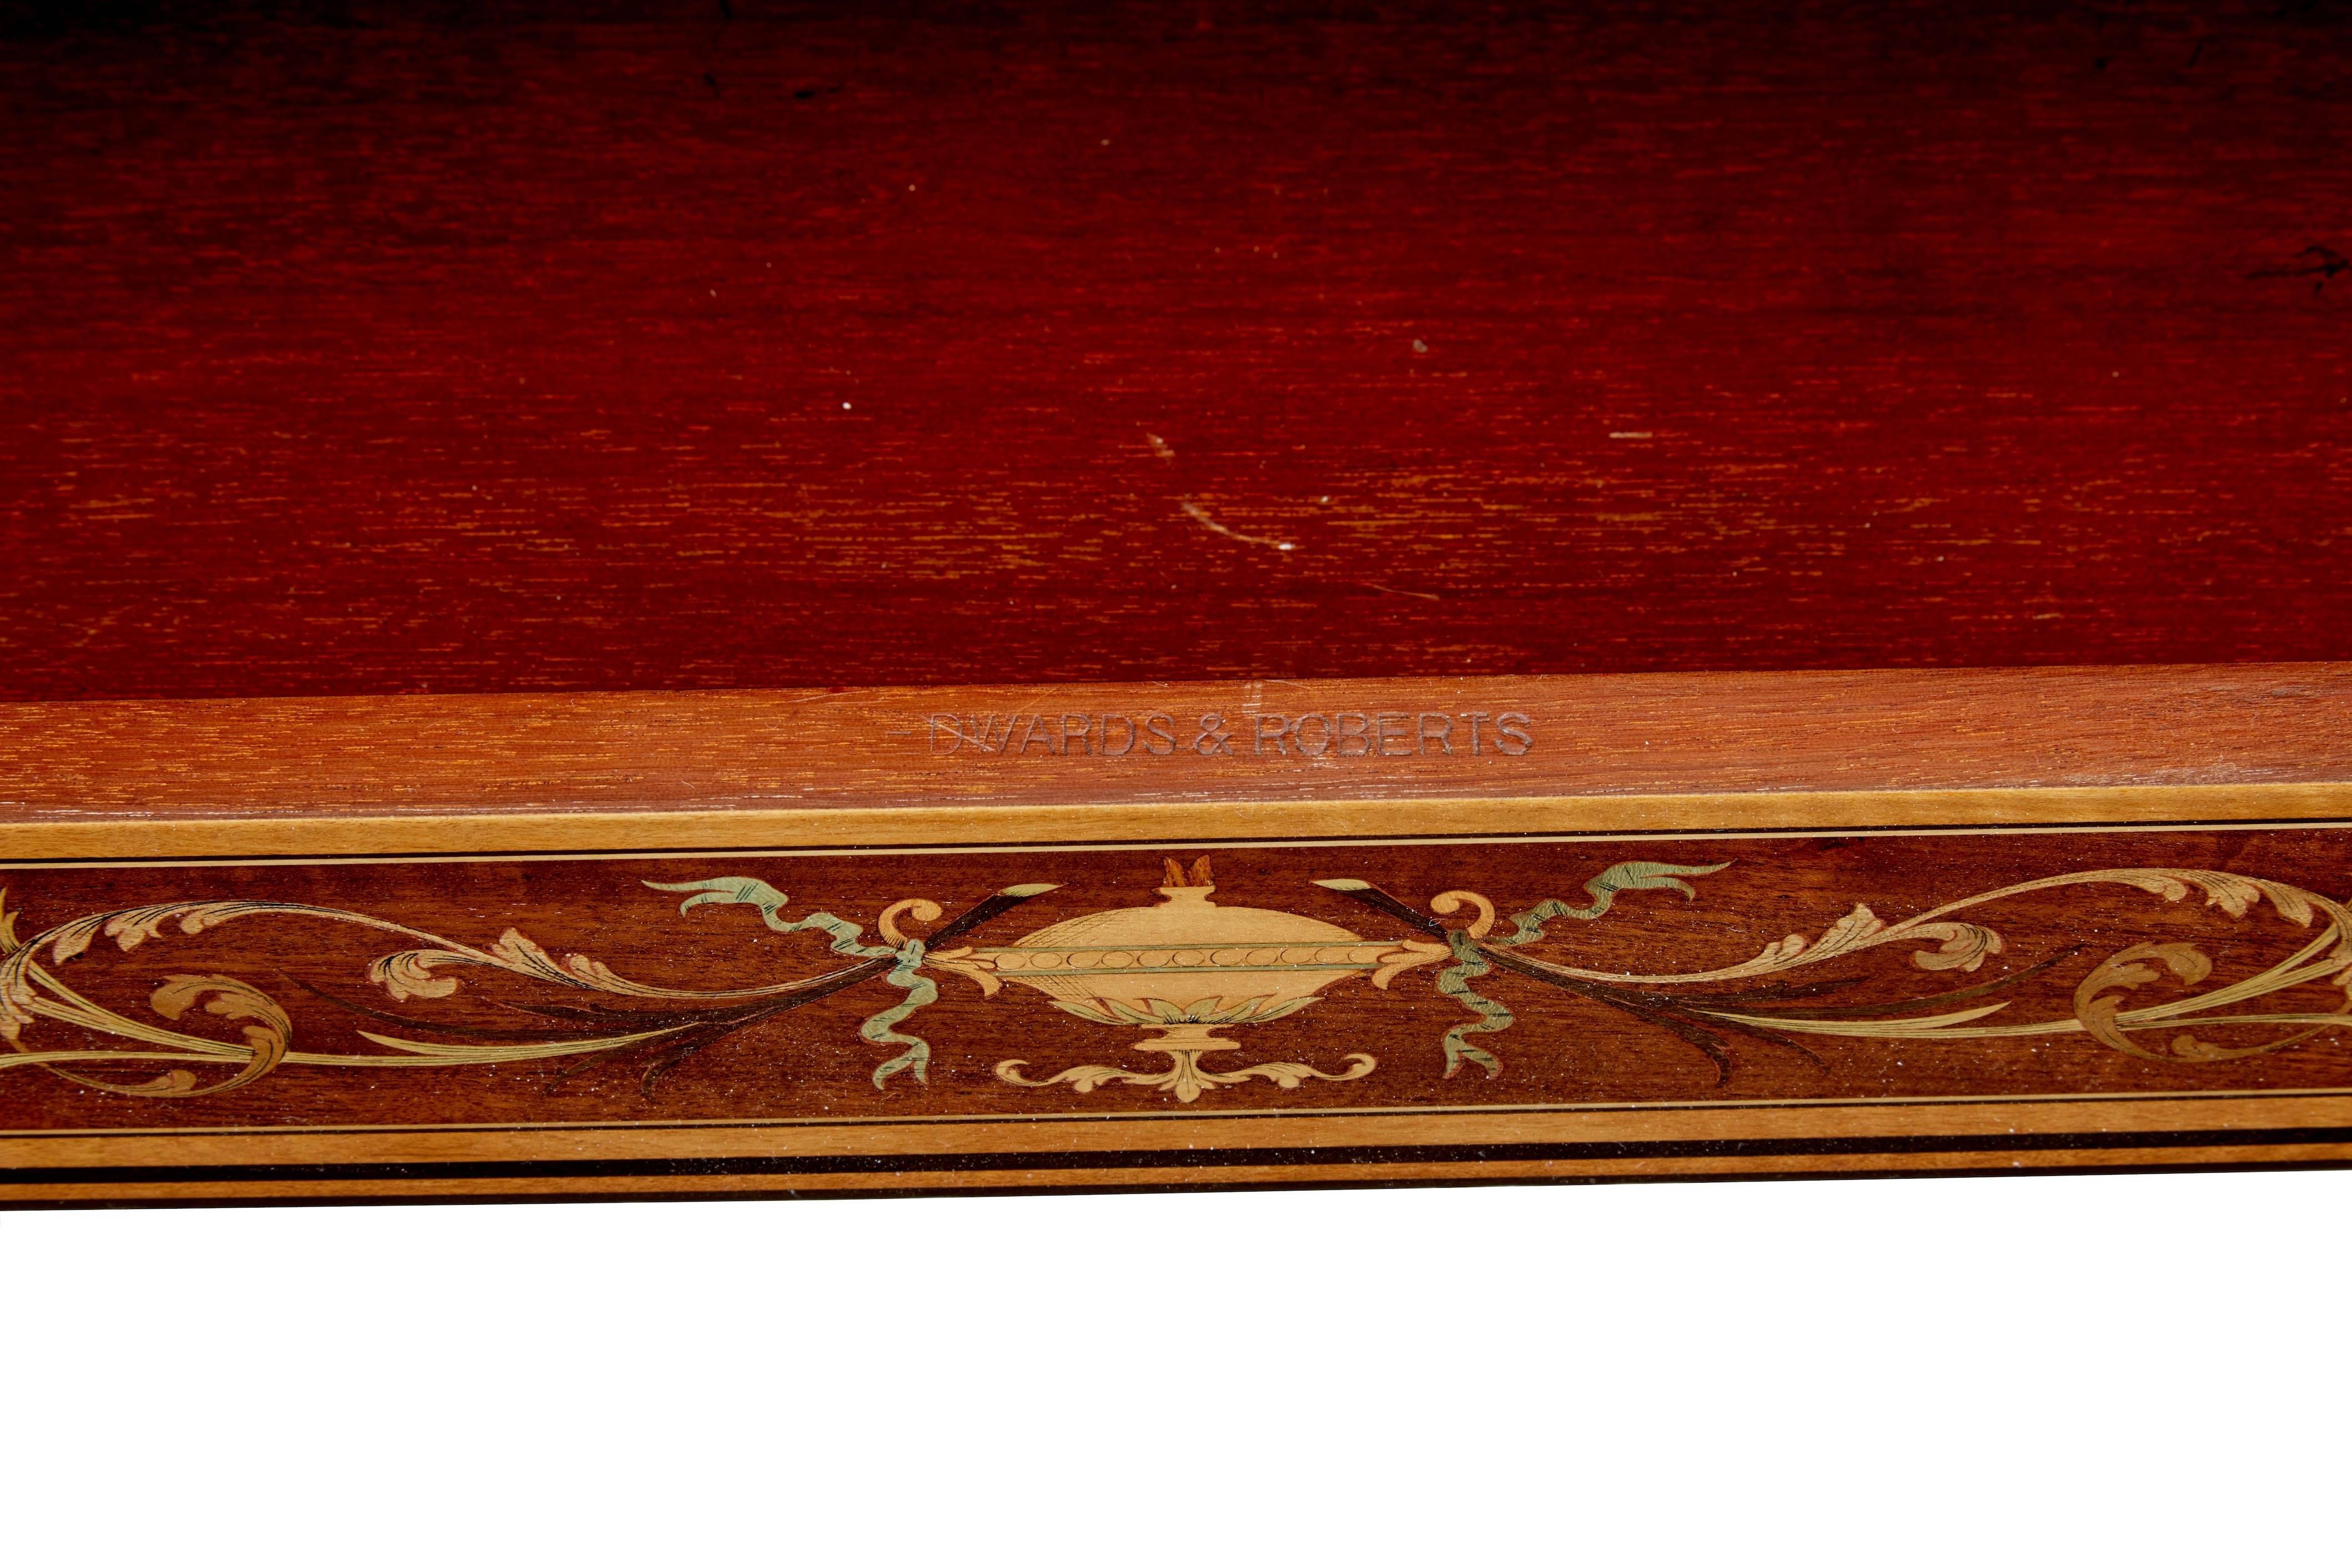 Late 19th Century Inlaid Mahogany Card Table by Edwards and Roberts 1